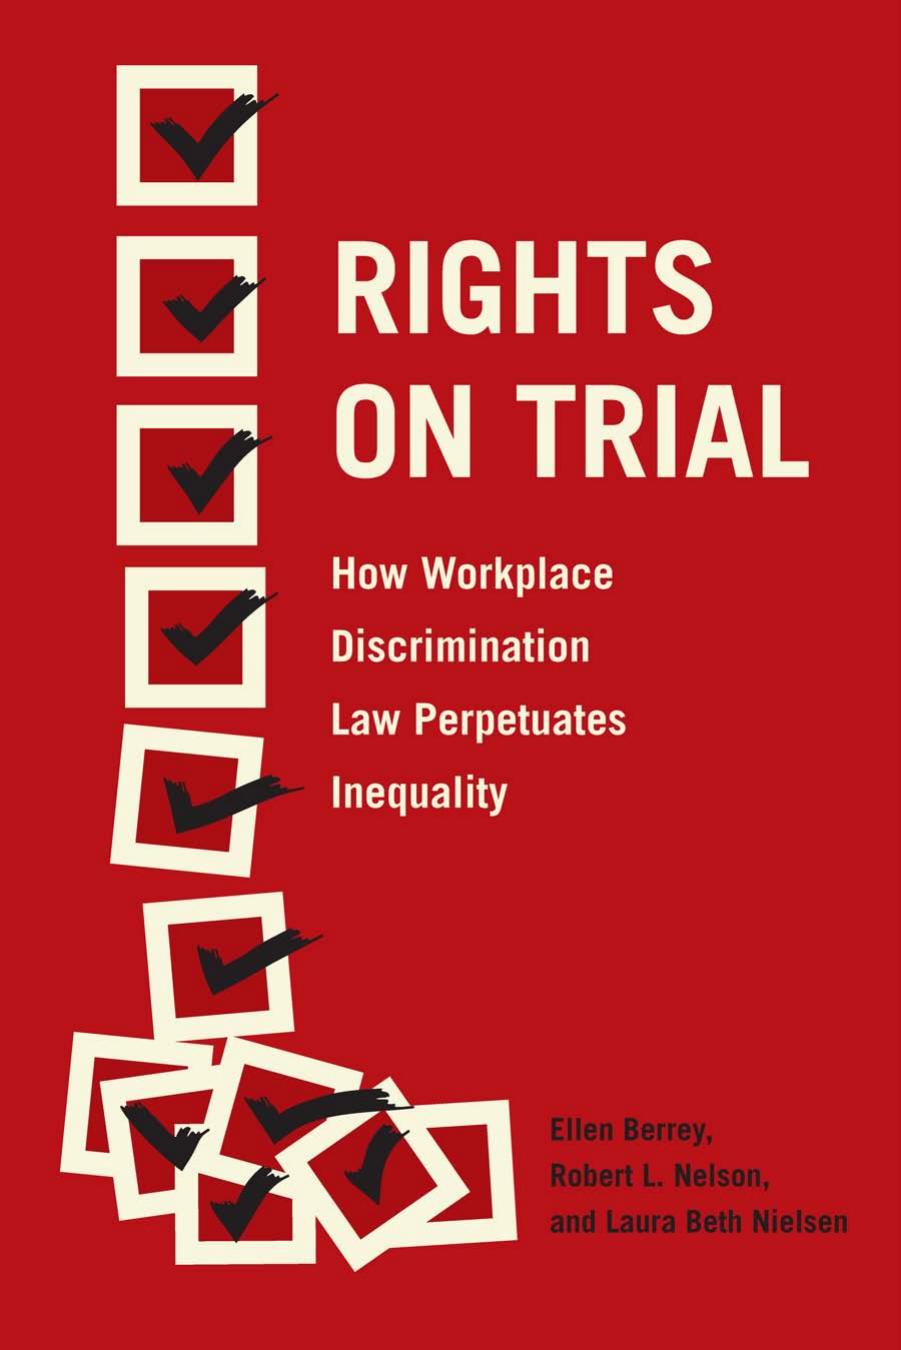 Rights on Trial: How Workplace Discrimination Law Perpetuates Inequality by Ellen Berrey and Robert L. Nelson and Laura Beth Nielsen